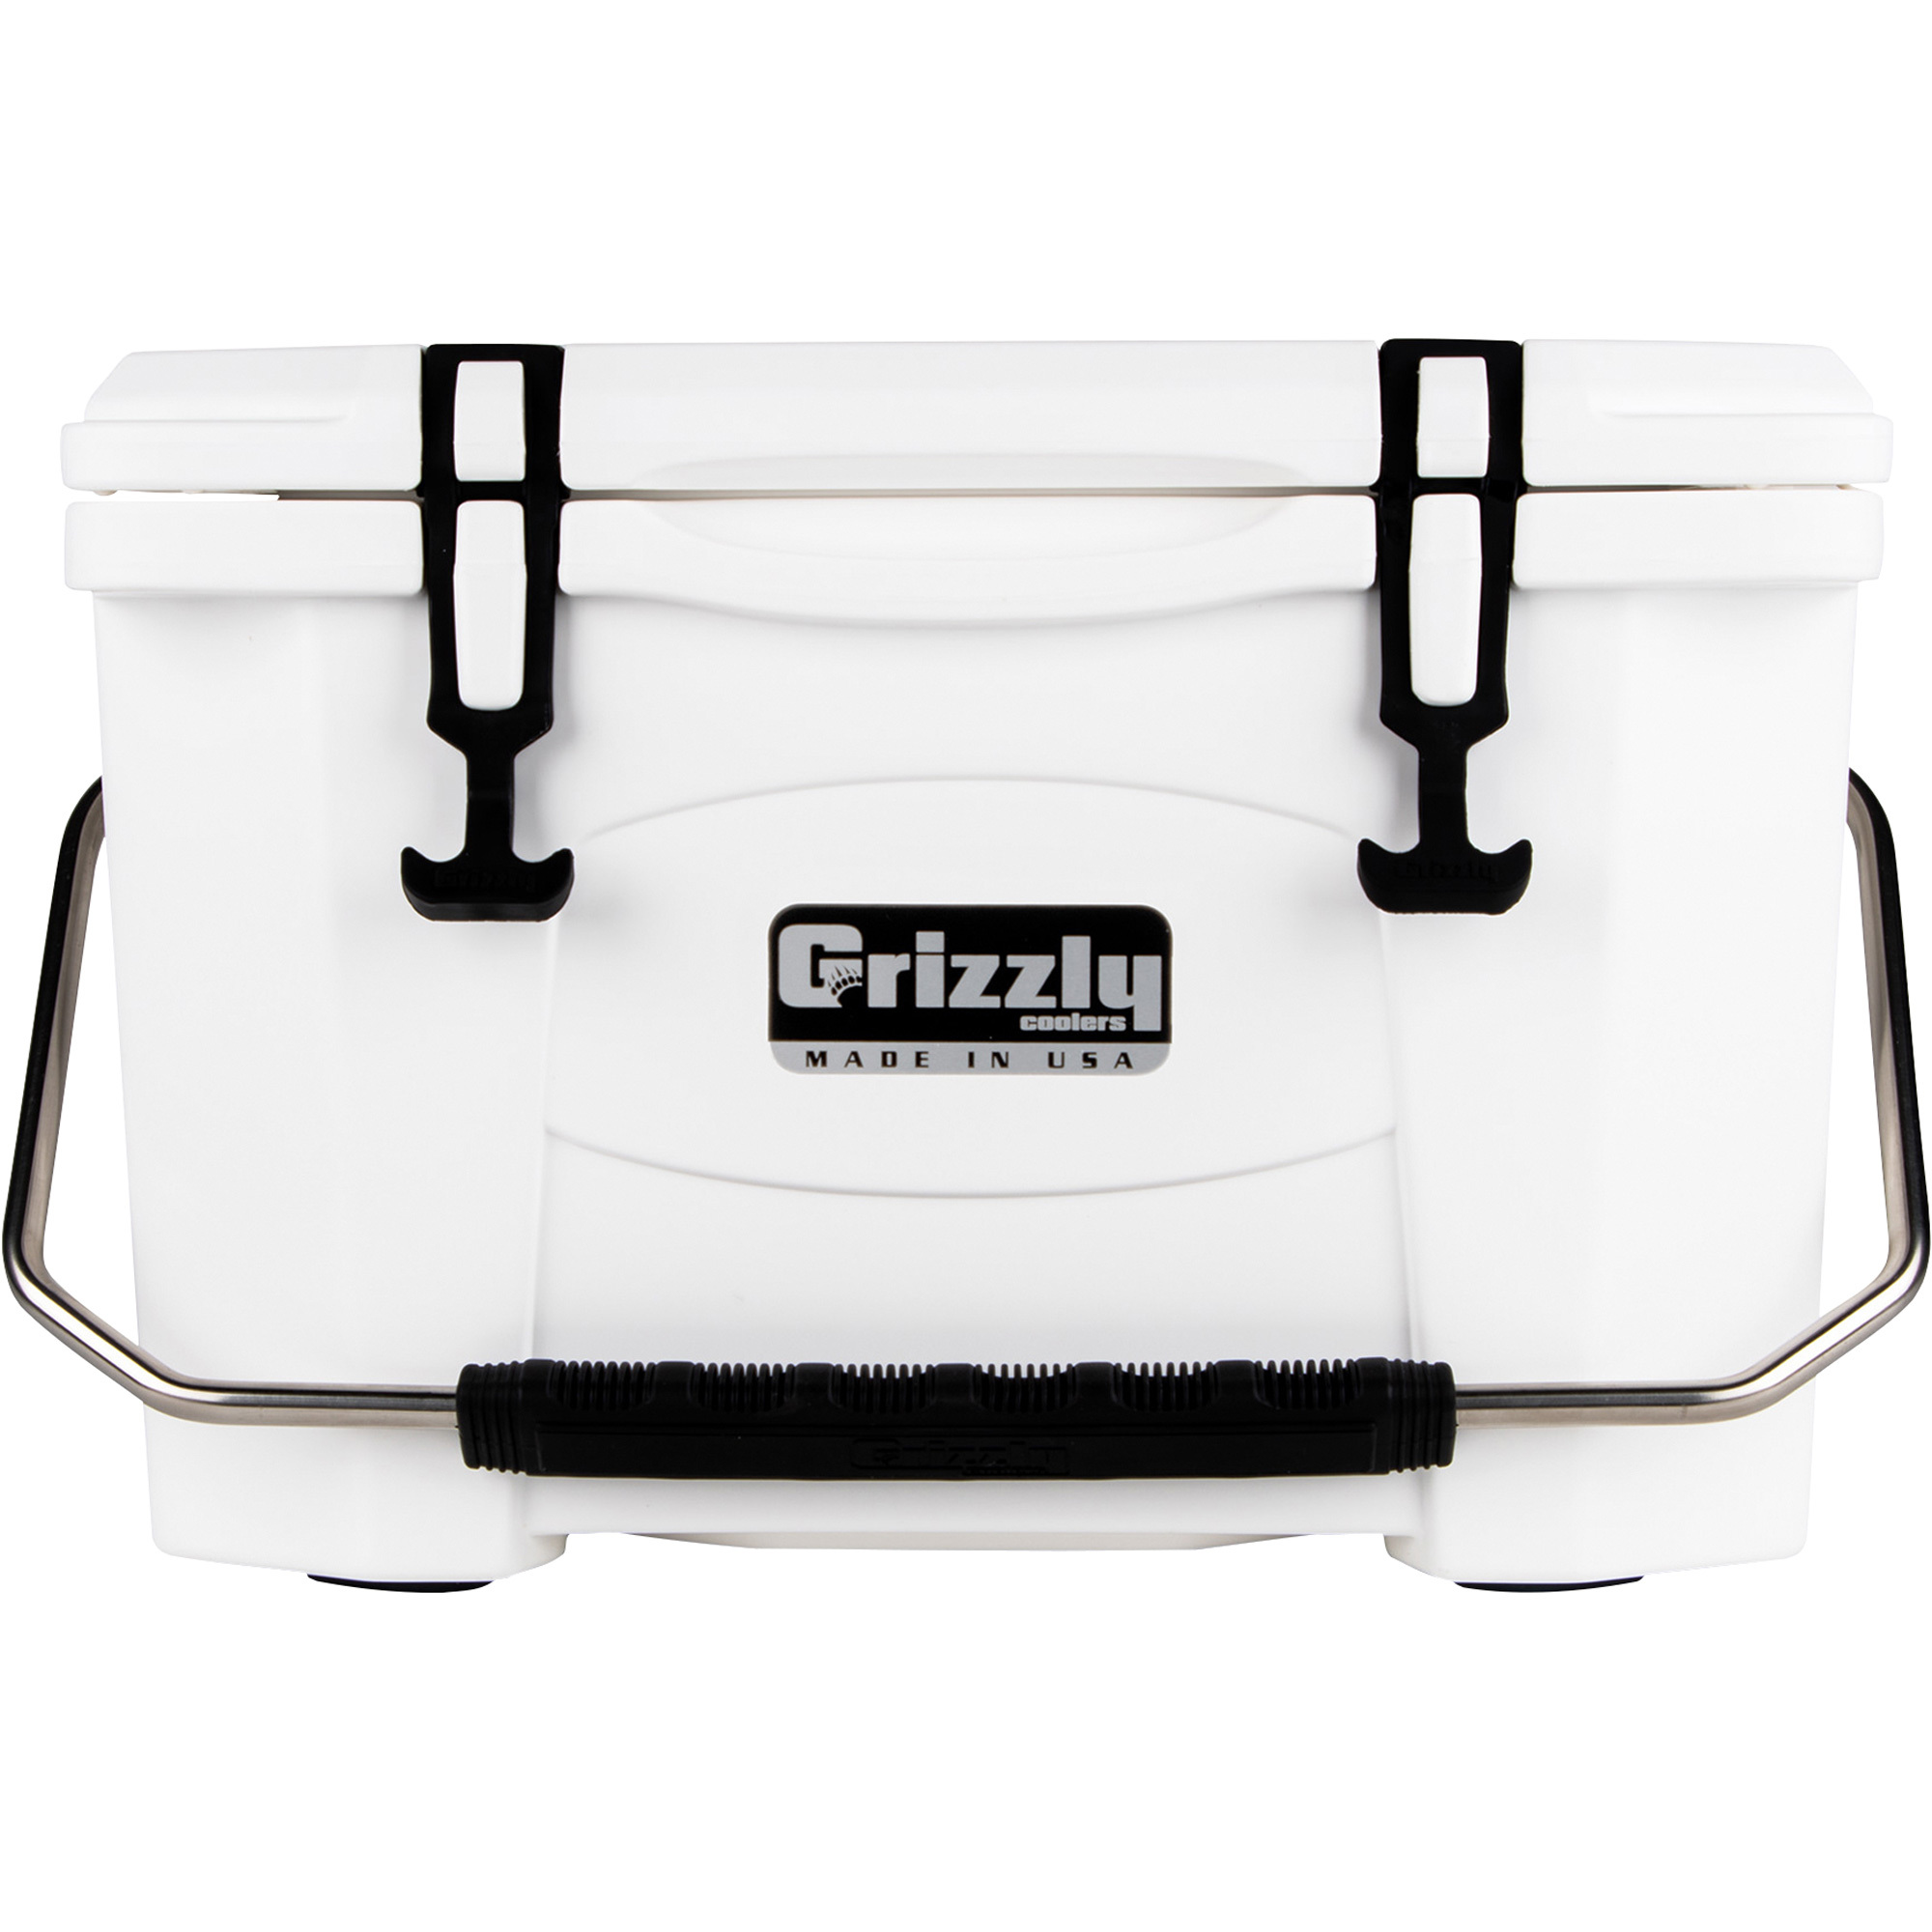 Grizzly Cooler 20-qt. White, Model G-20